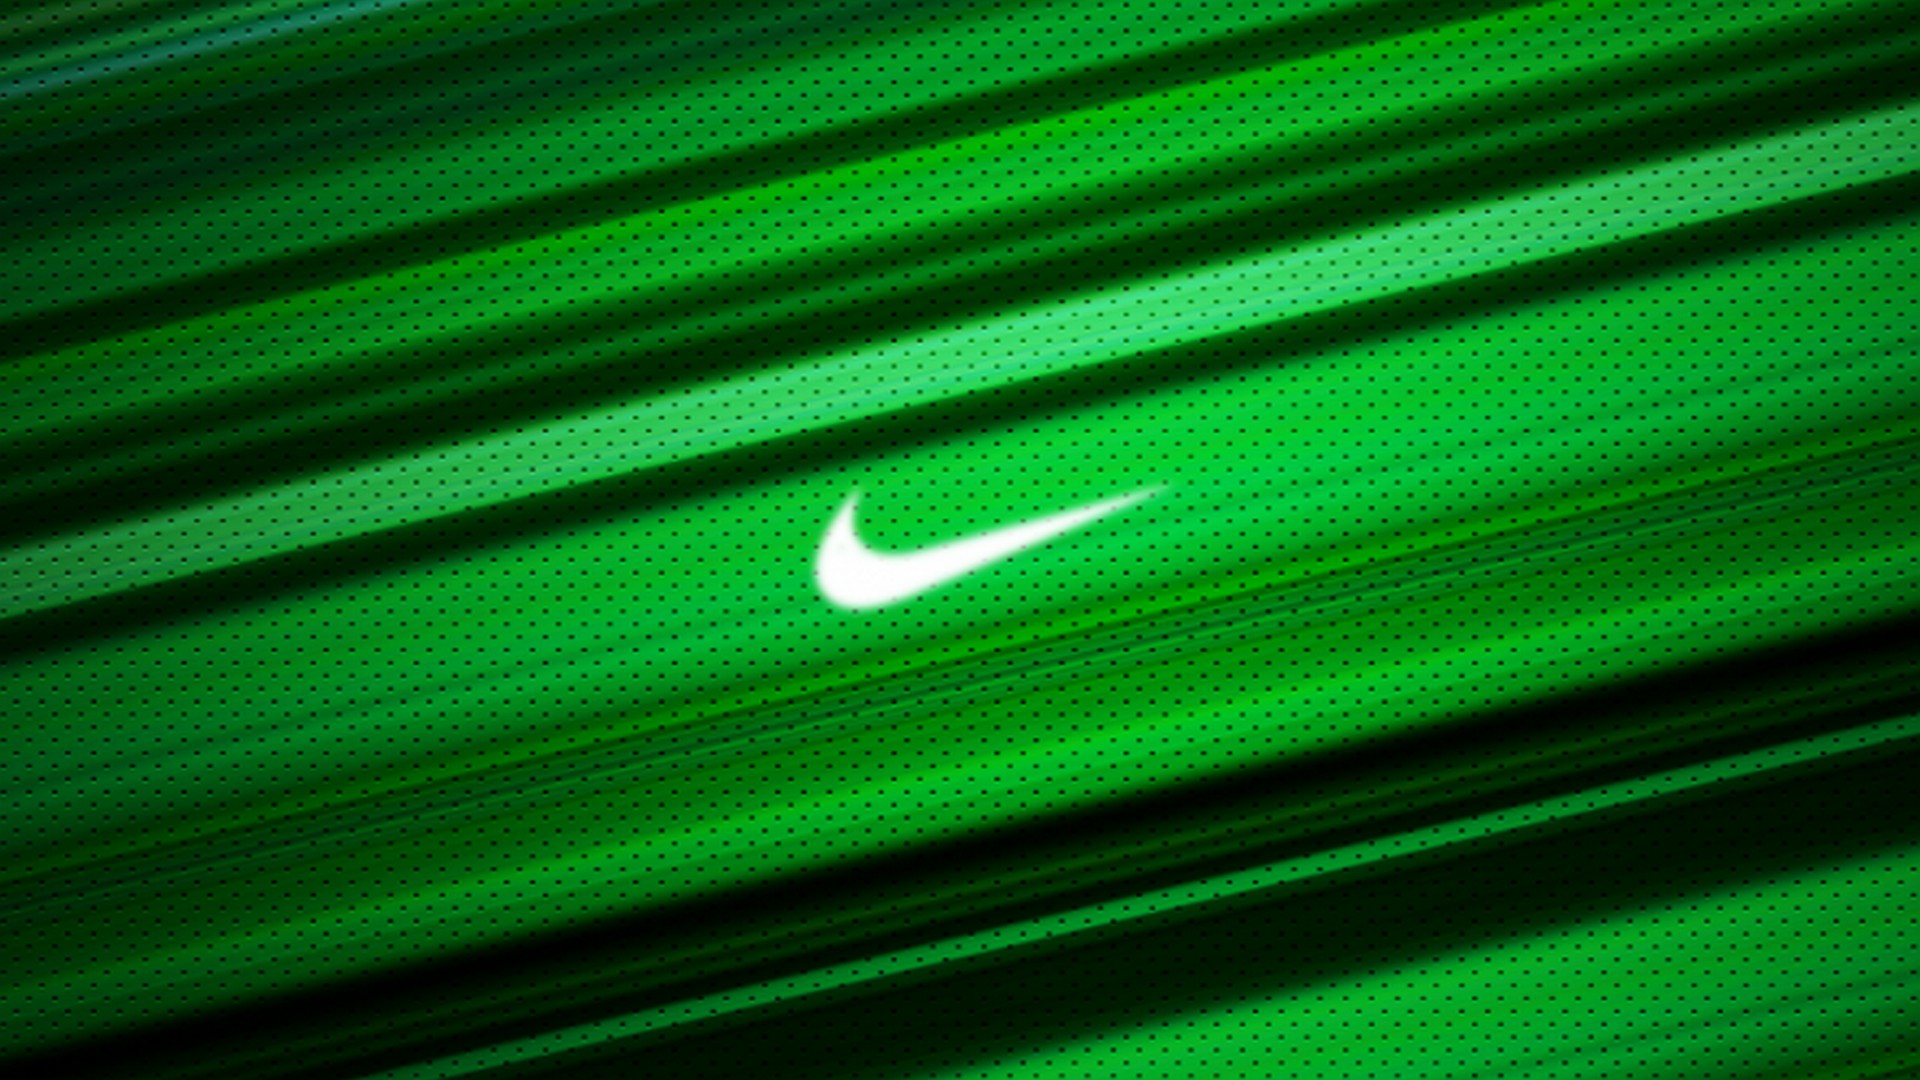 Neon Green HD Backgrounds With Resolution 1920X1080 pixel. You can make this wallpaper for your Desktop Computer Backgrounds, Mac Wallpapers, Android Lock screen or iPhone Screensavers